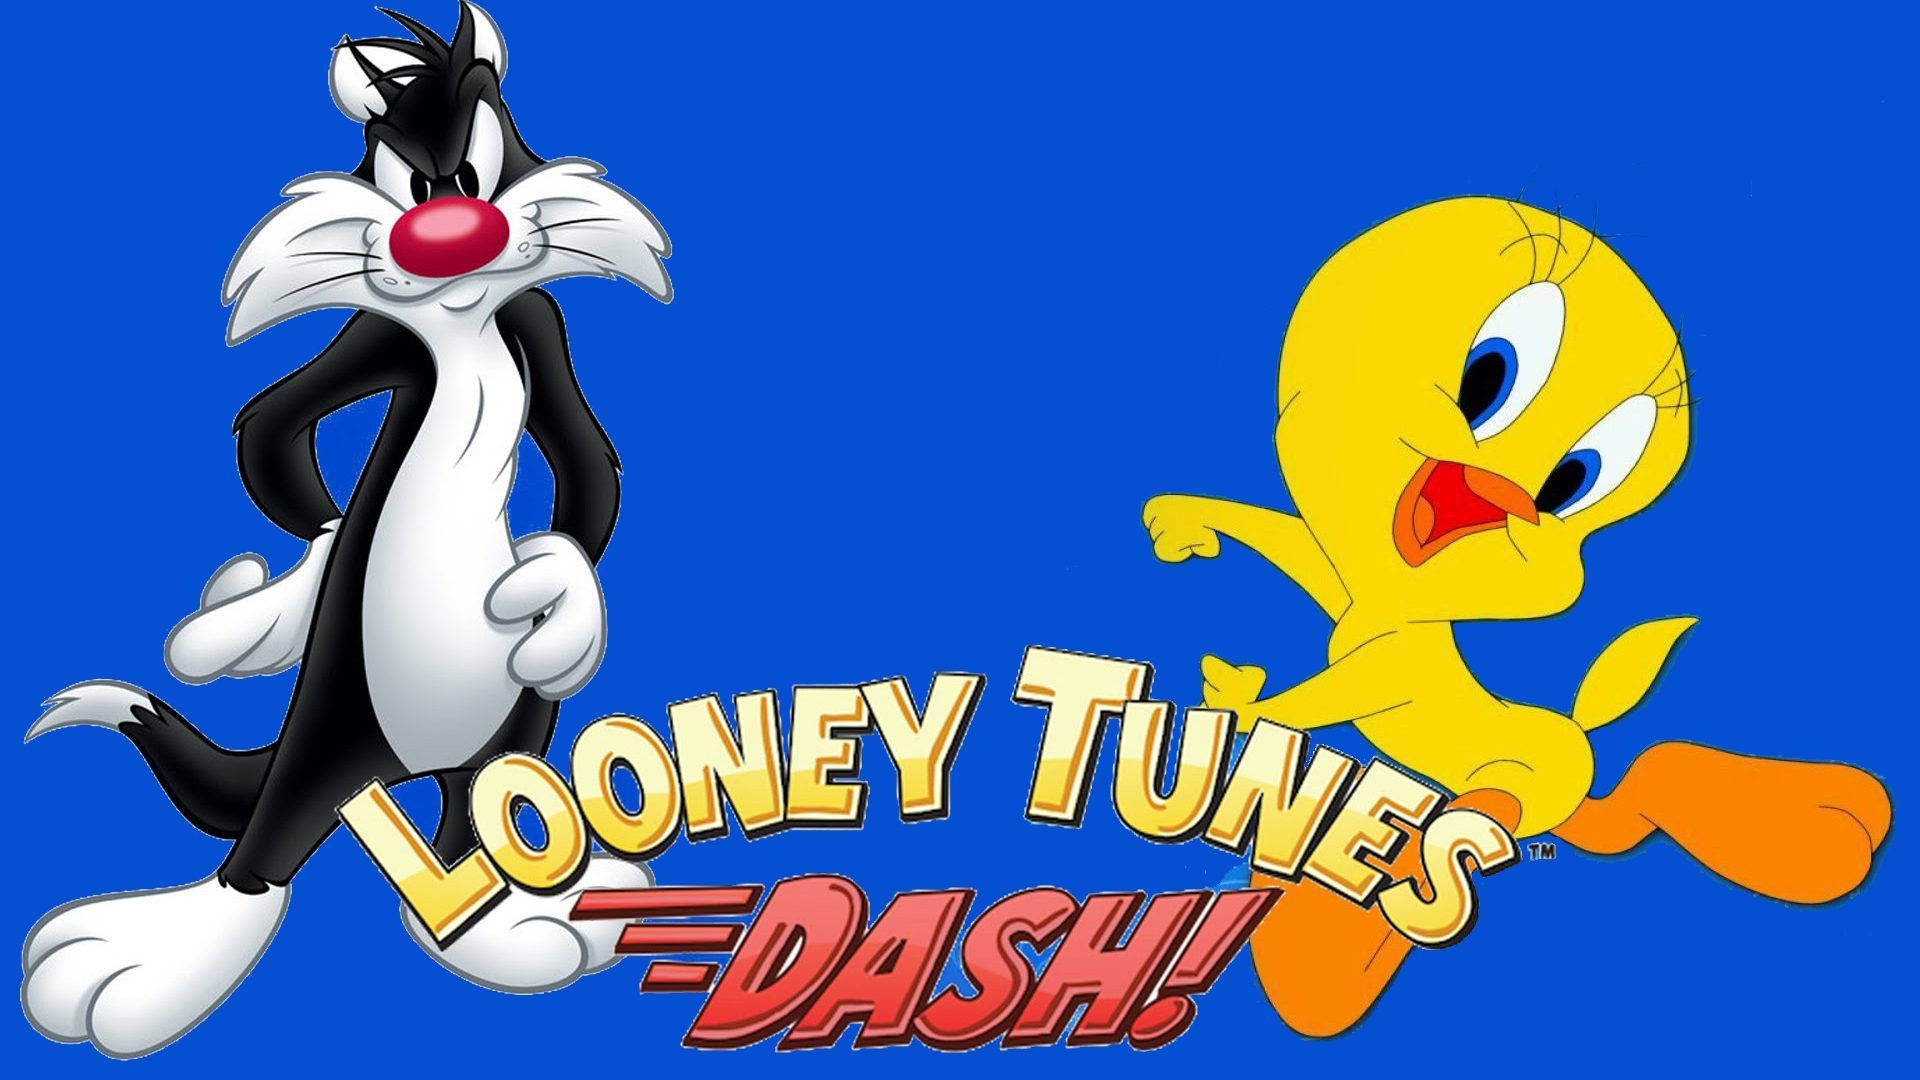 Sylvester And Looney Tunes Dash Background